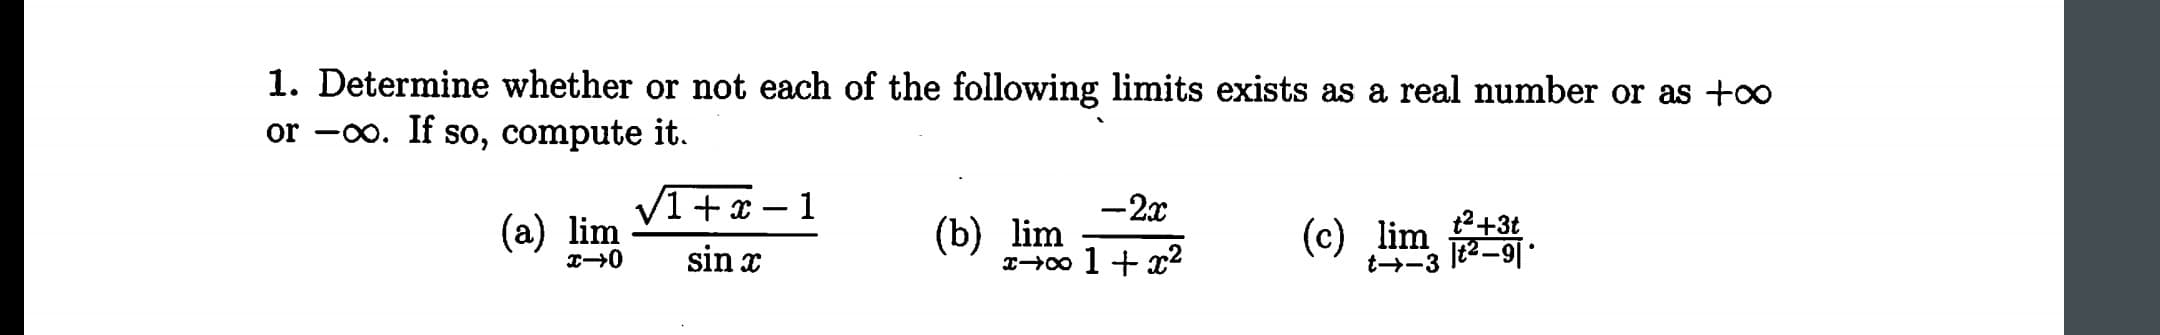 1. Determine whether or not each of the following limits exists as a real number or as +oo
or -oo. If so, compute it.
-2x
2+3t
J2-9
(a) lim
(b) lim
x-0o 1
(c) lim
sin x
t--3
